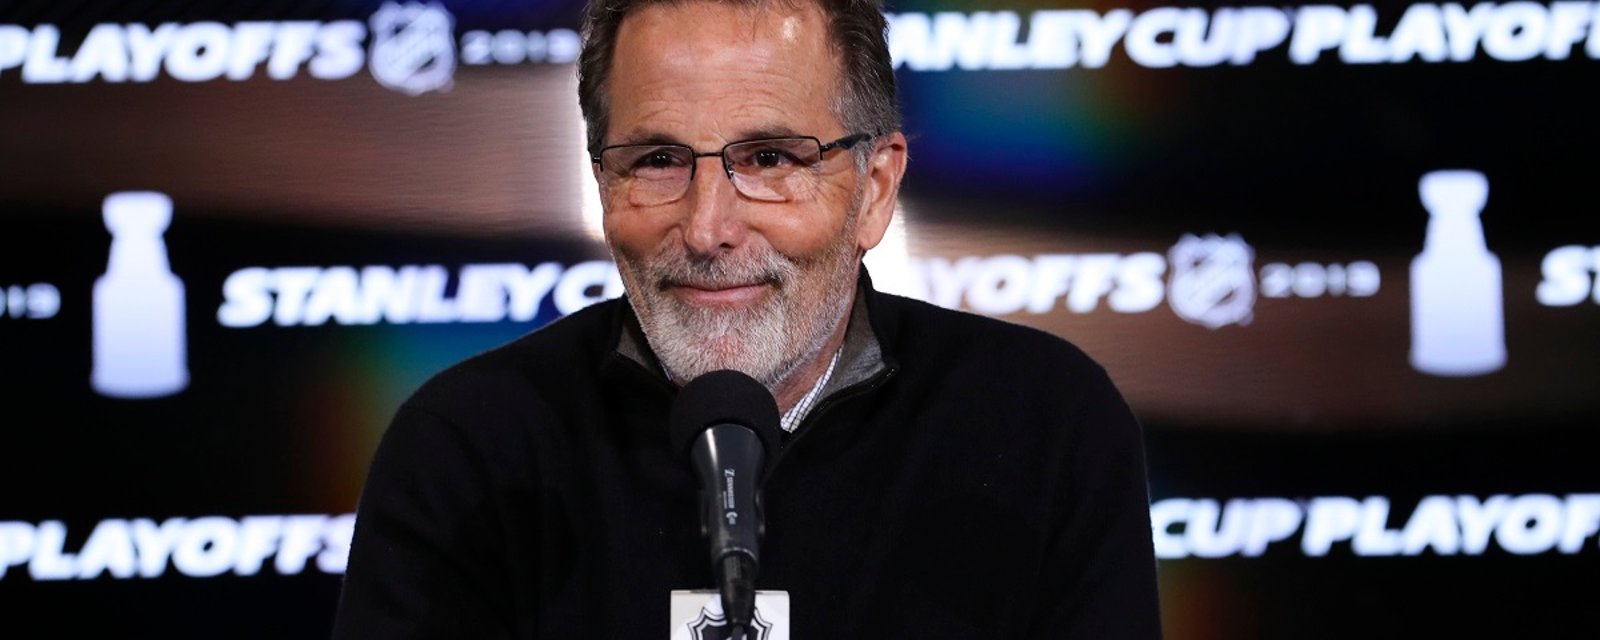 John Tortorella believes the Blue Jackets have found a weakness in the Bruins.